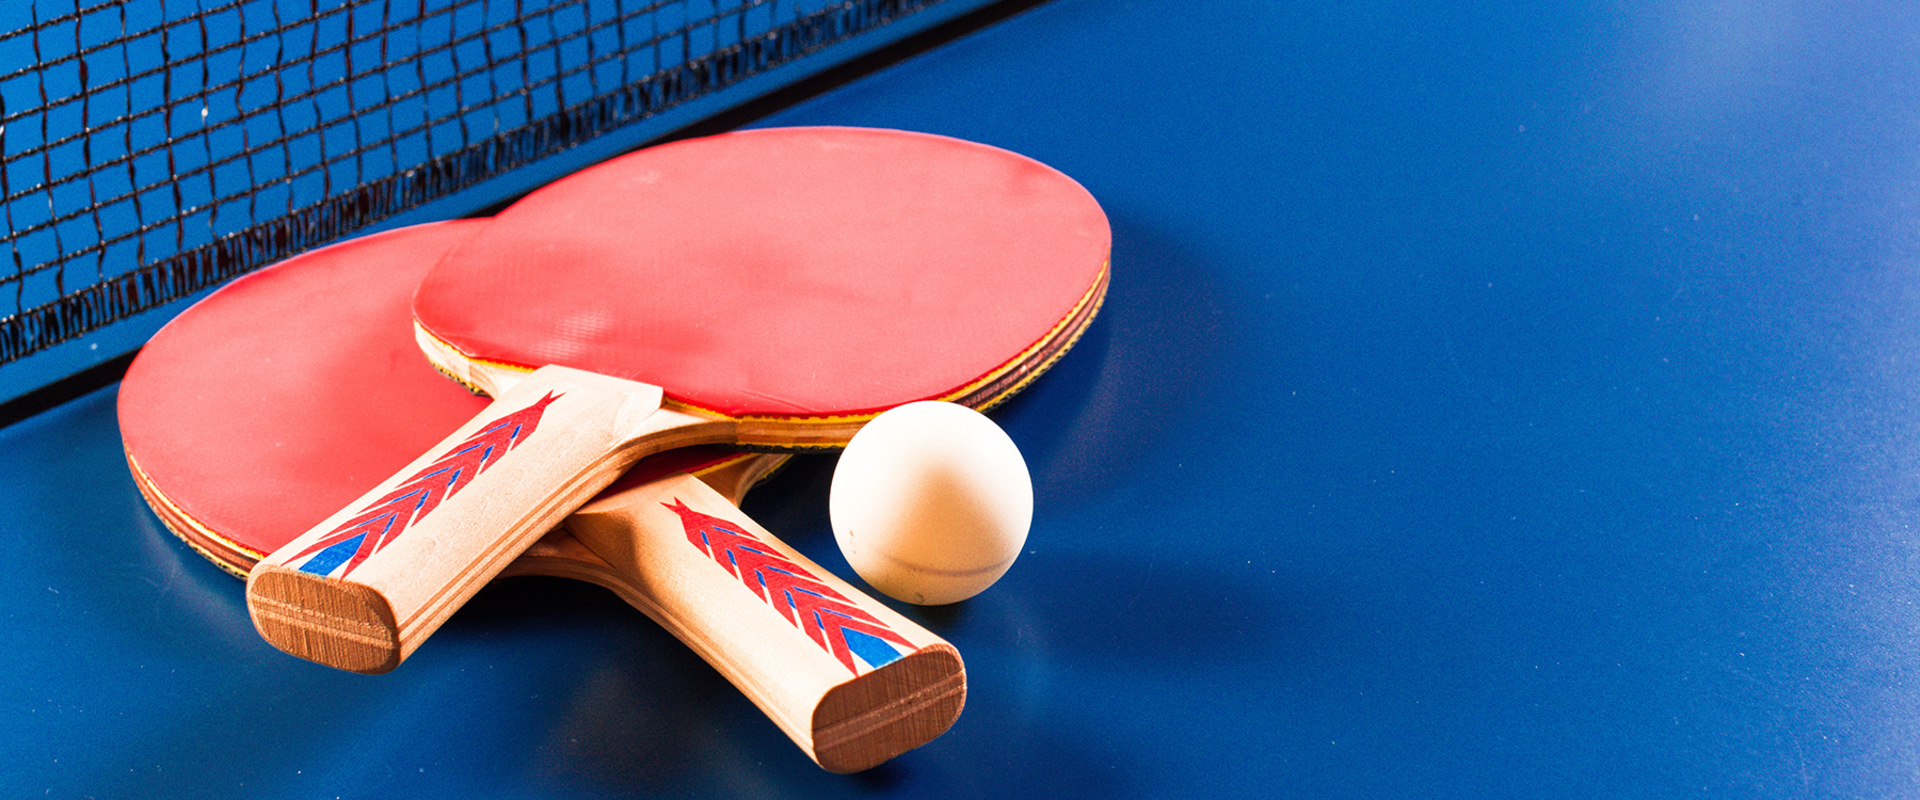 Are Ping Pong Games Played to 11 Points?